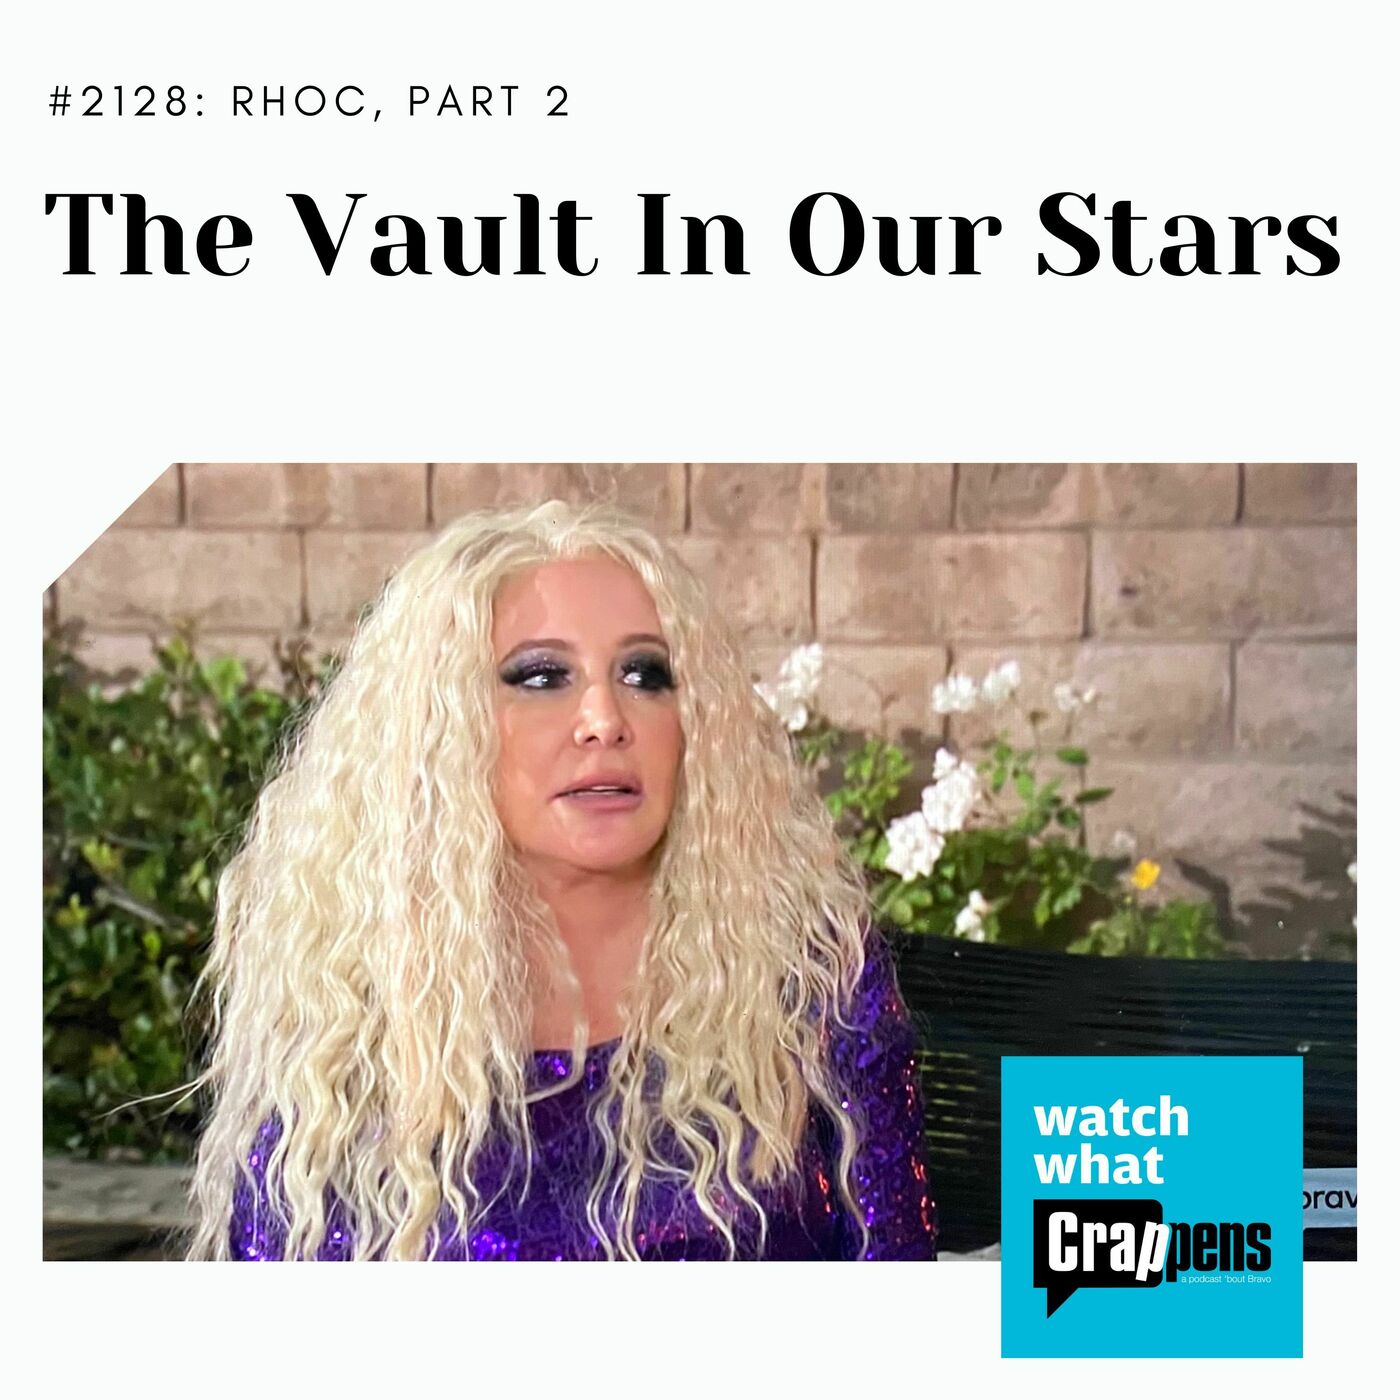 RHOC: The Vault in Our Stars, Part 2